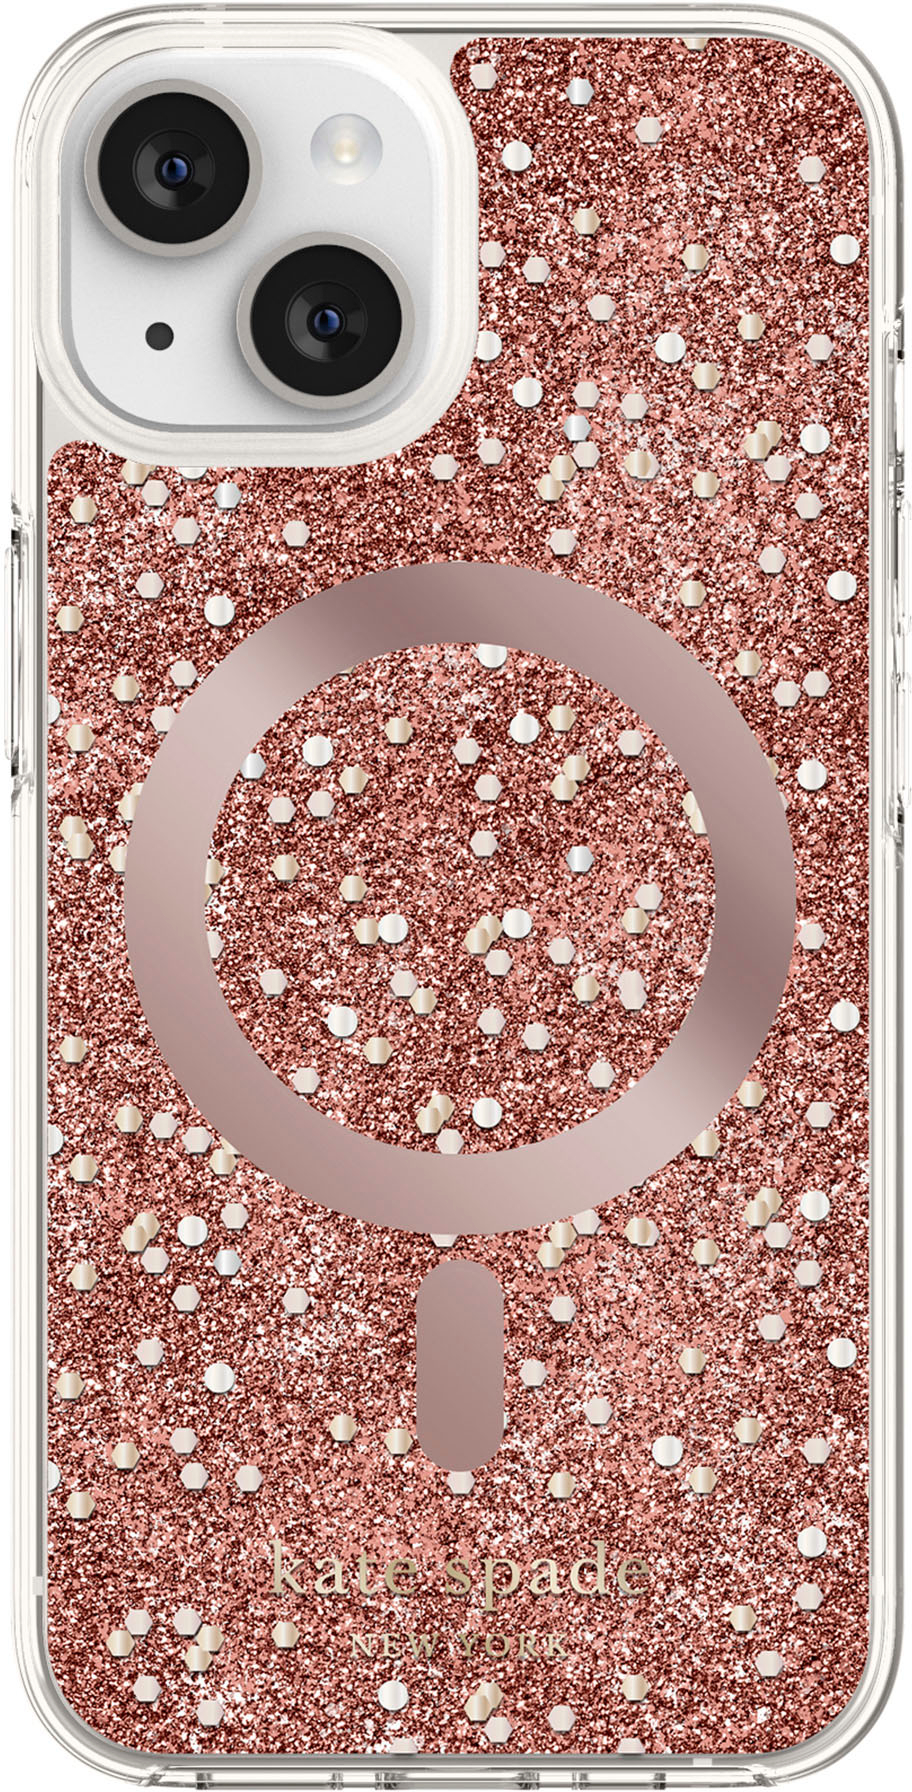 Rose Gold Faux Glitter Checkerboard Pattern iPhone Case for Sale